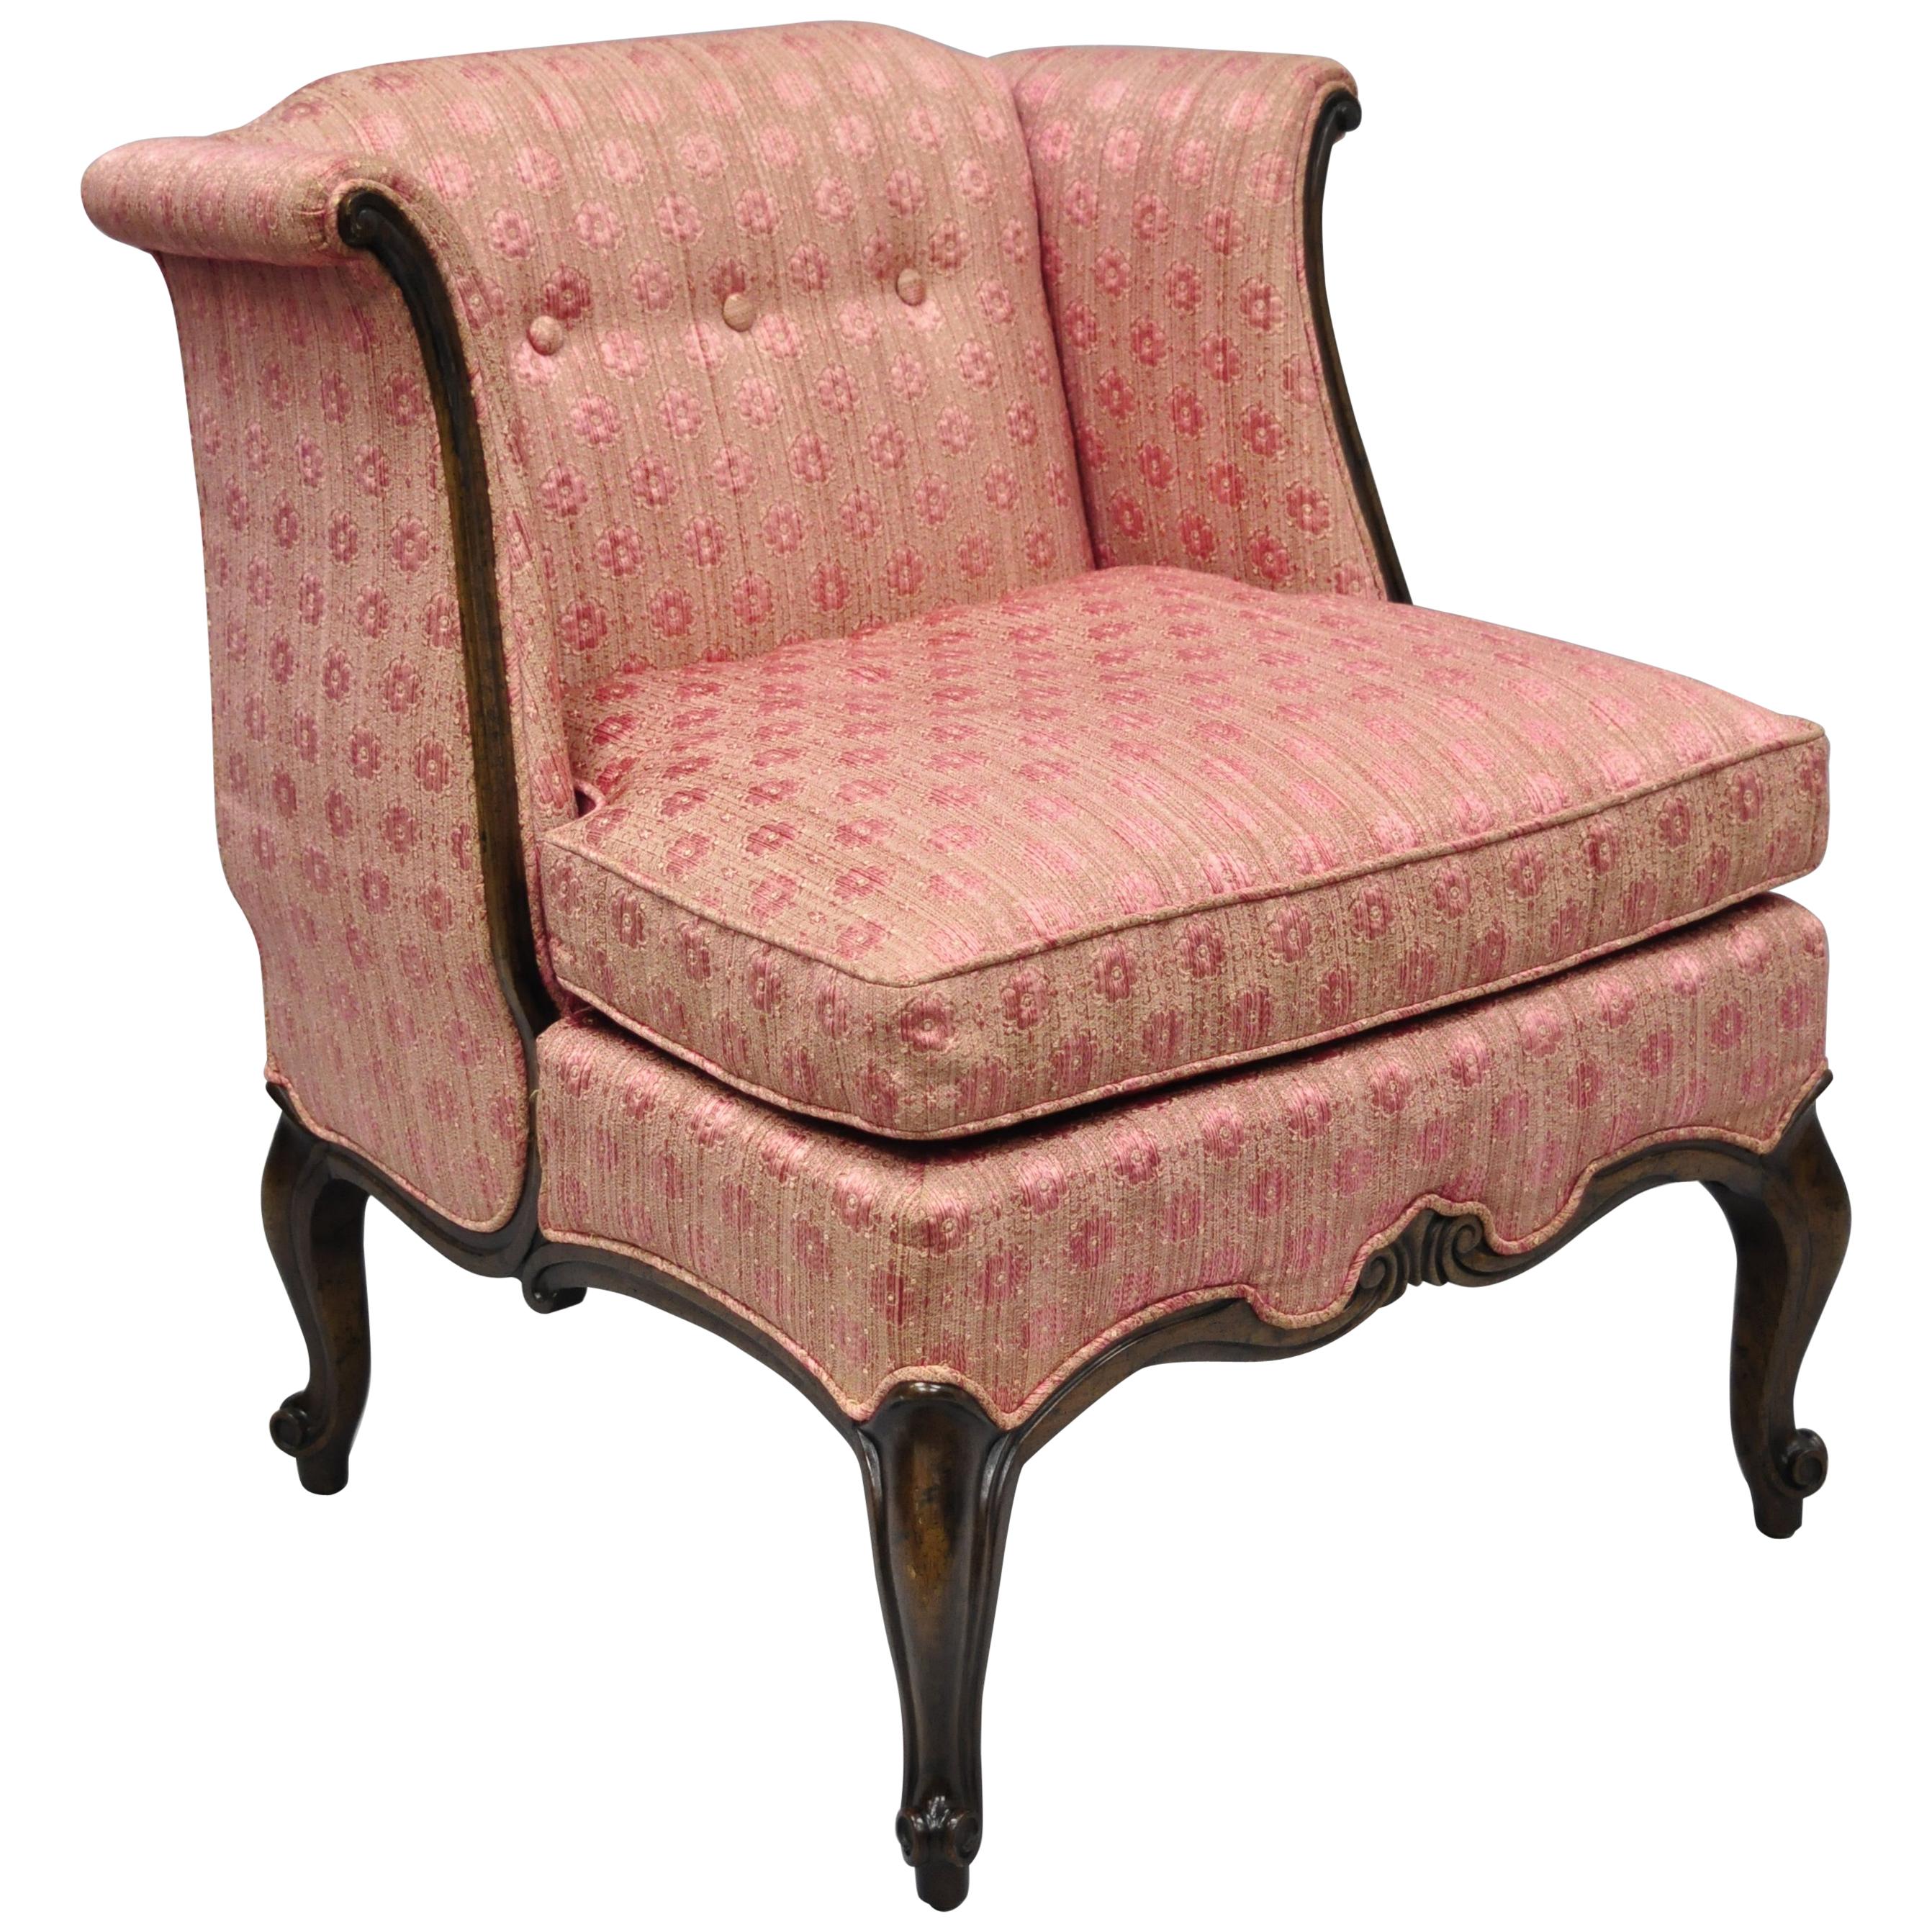 Knapp & Tubbs Kenilworth French Country Louis XV Style Boudoir Accent Side Chair